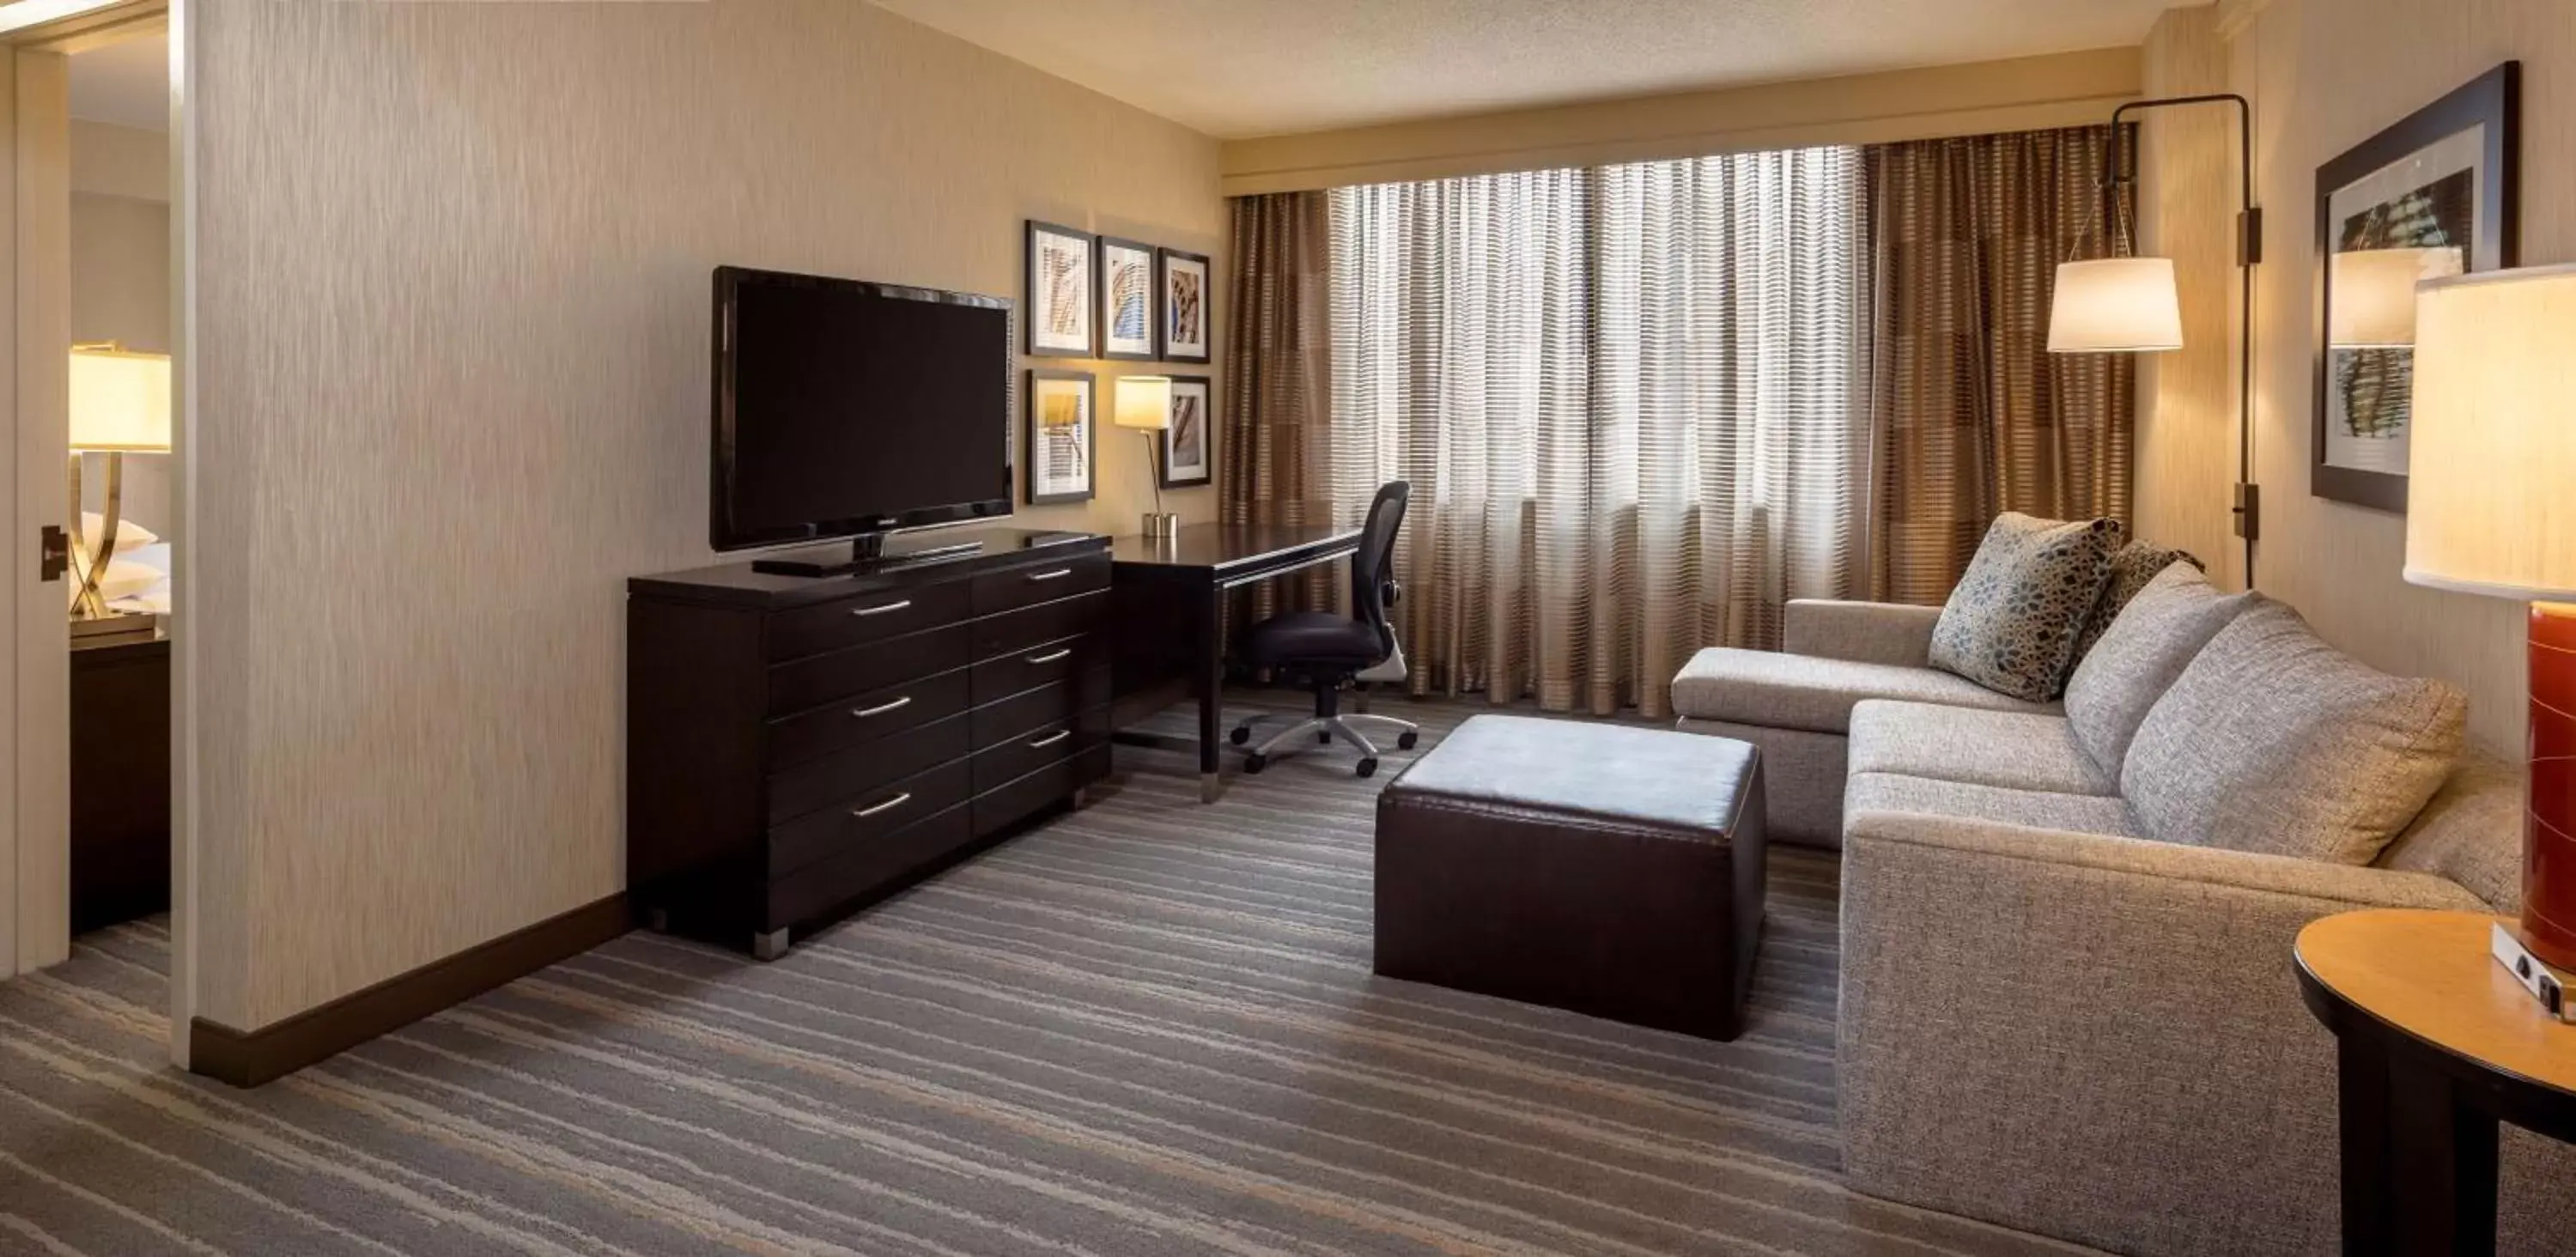 Apartment in DoubleTree Suites by Hilton Minneapolis Downtown